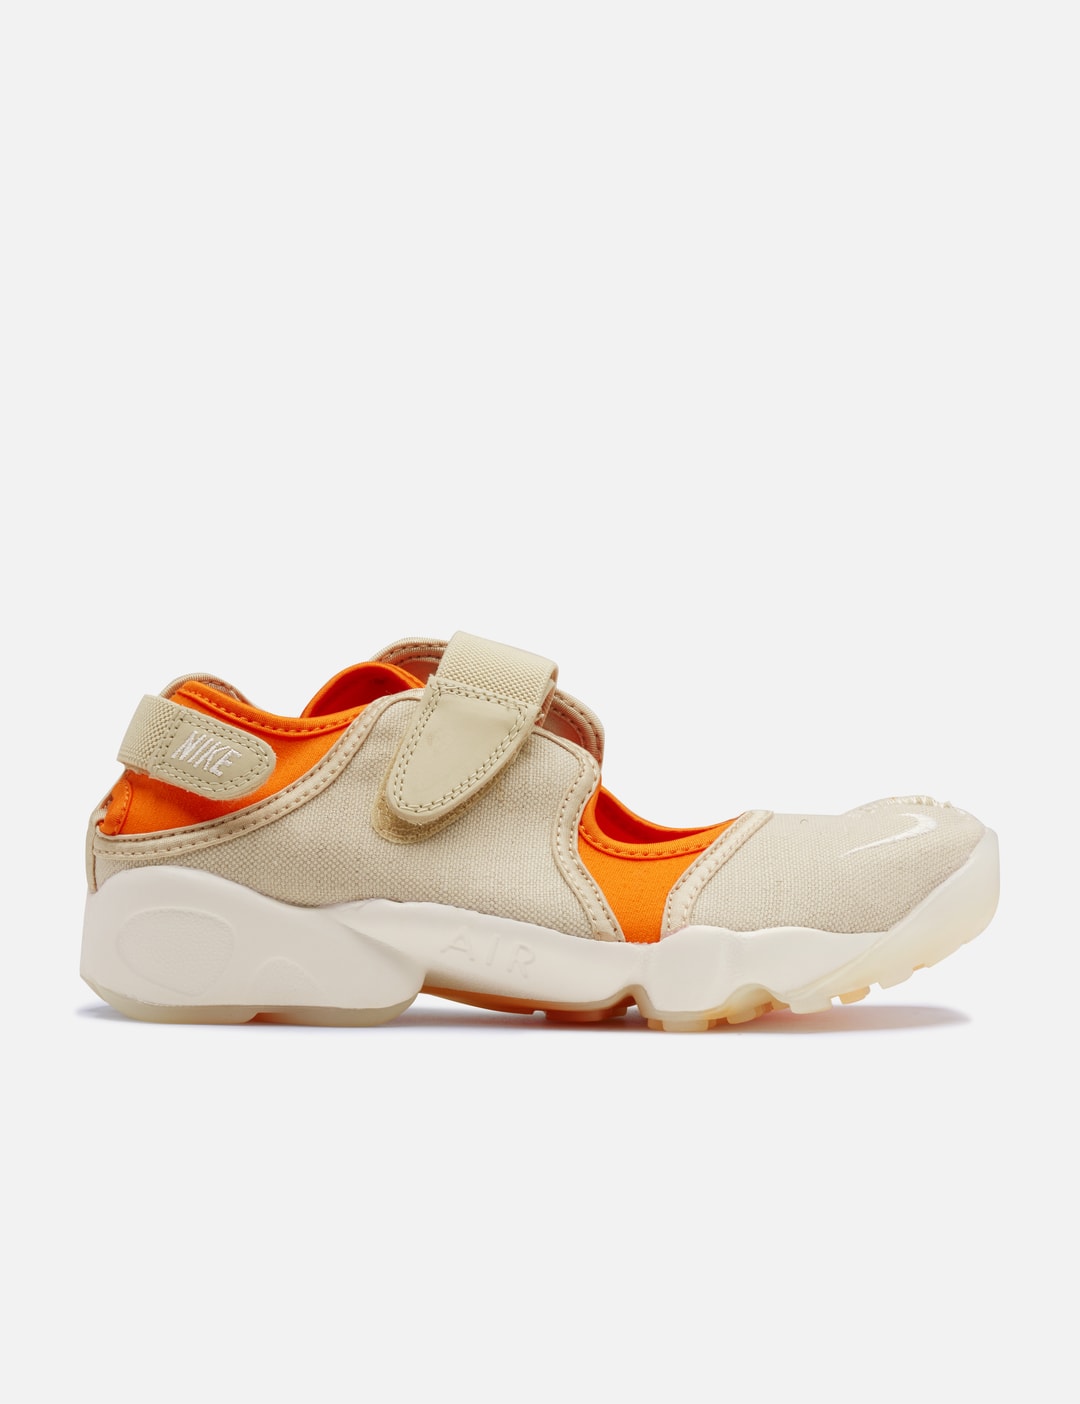 Nike Nike Air Rift | HBX - Curated Fashion and Lifestyle by